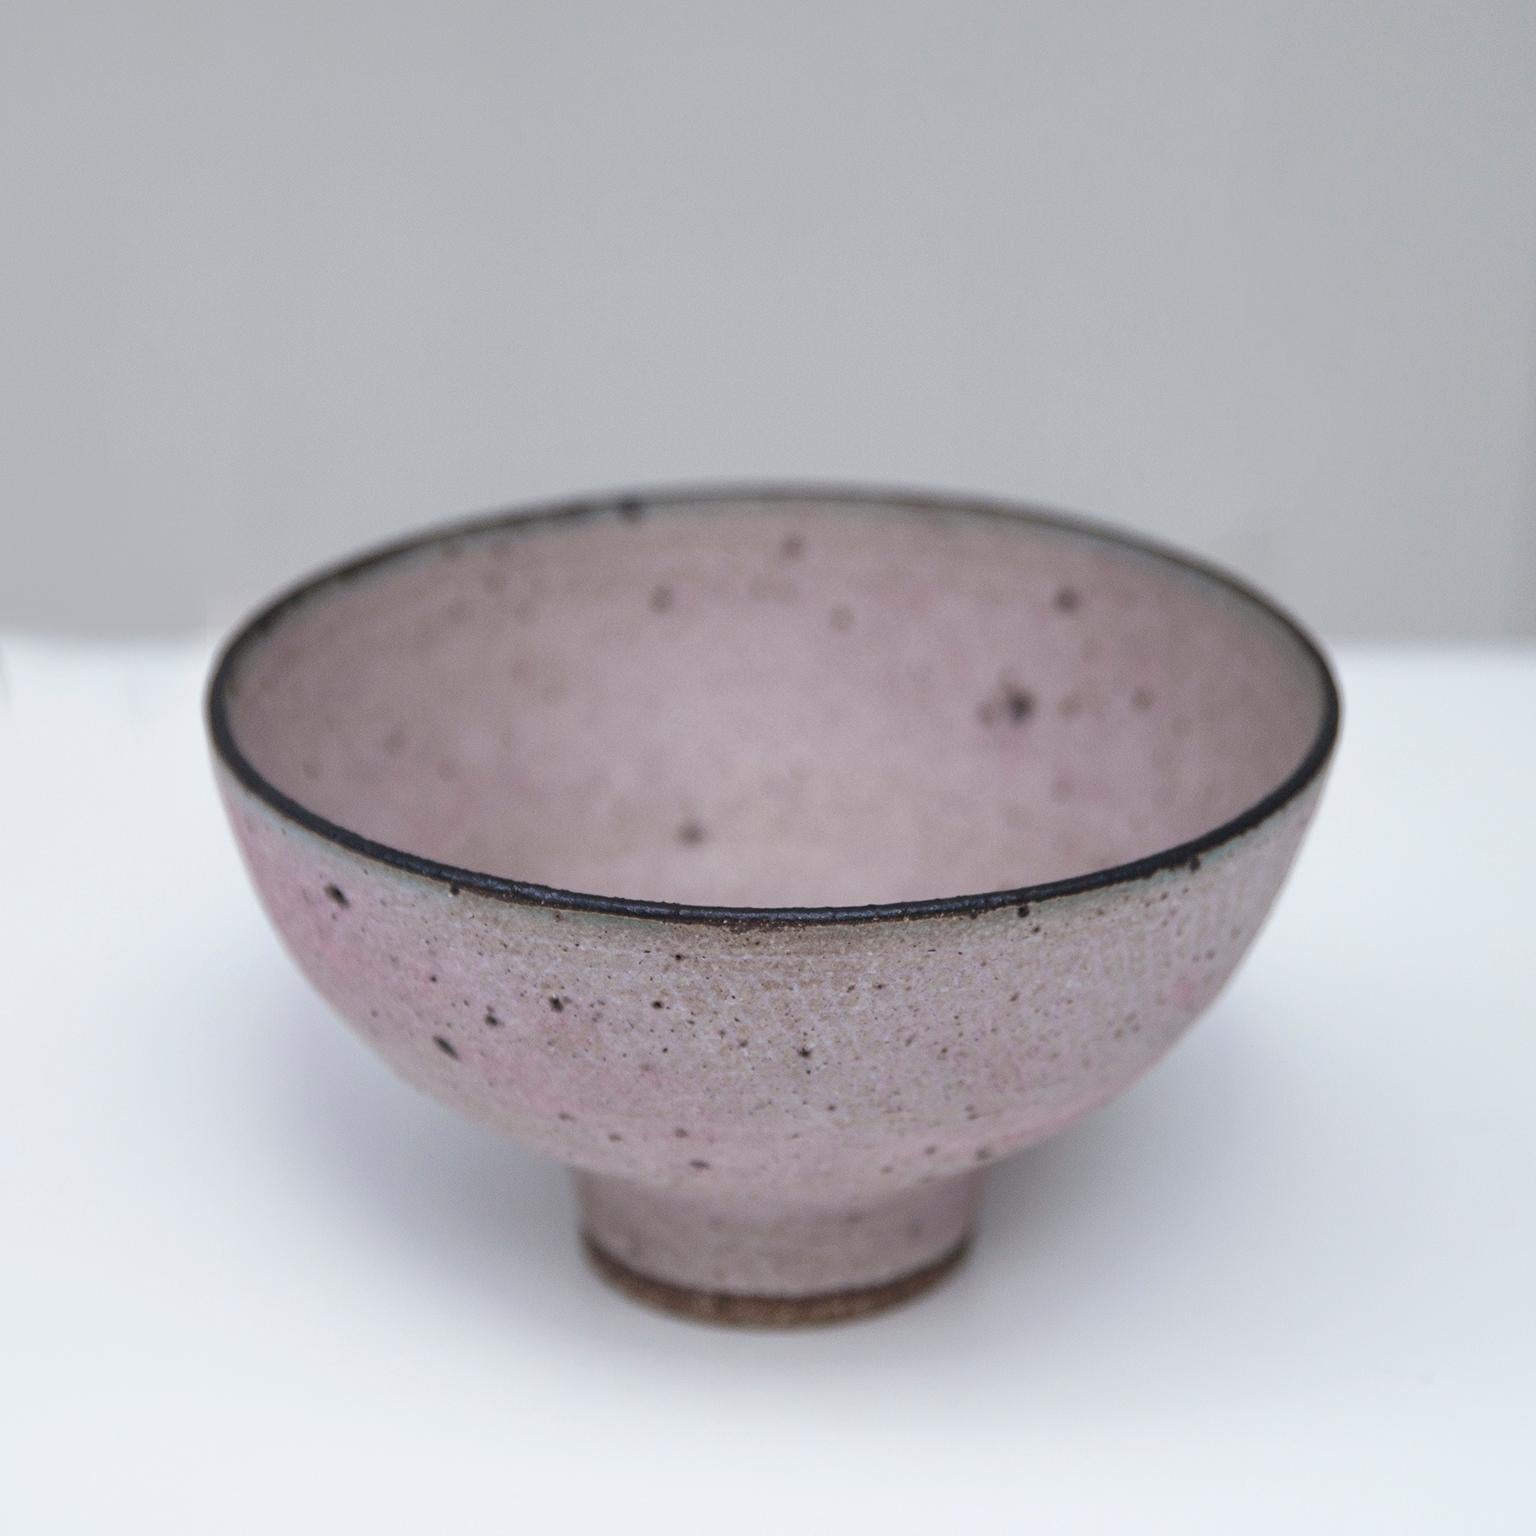 Extraordinary stoneware bowl of the famous ceramic artist Lucie Rie.
Slightly beige-pink matte glaze with stronger pink spots, brown, partially bluish edge. Interior and exterior wall with sgraffito decor. Partially brown speckles. Measures: H 9.3